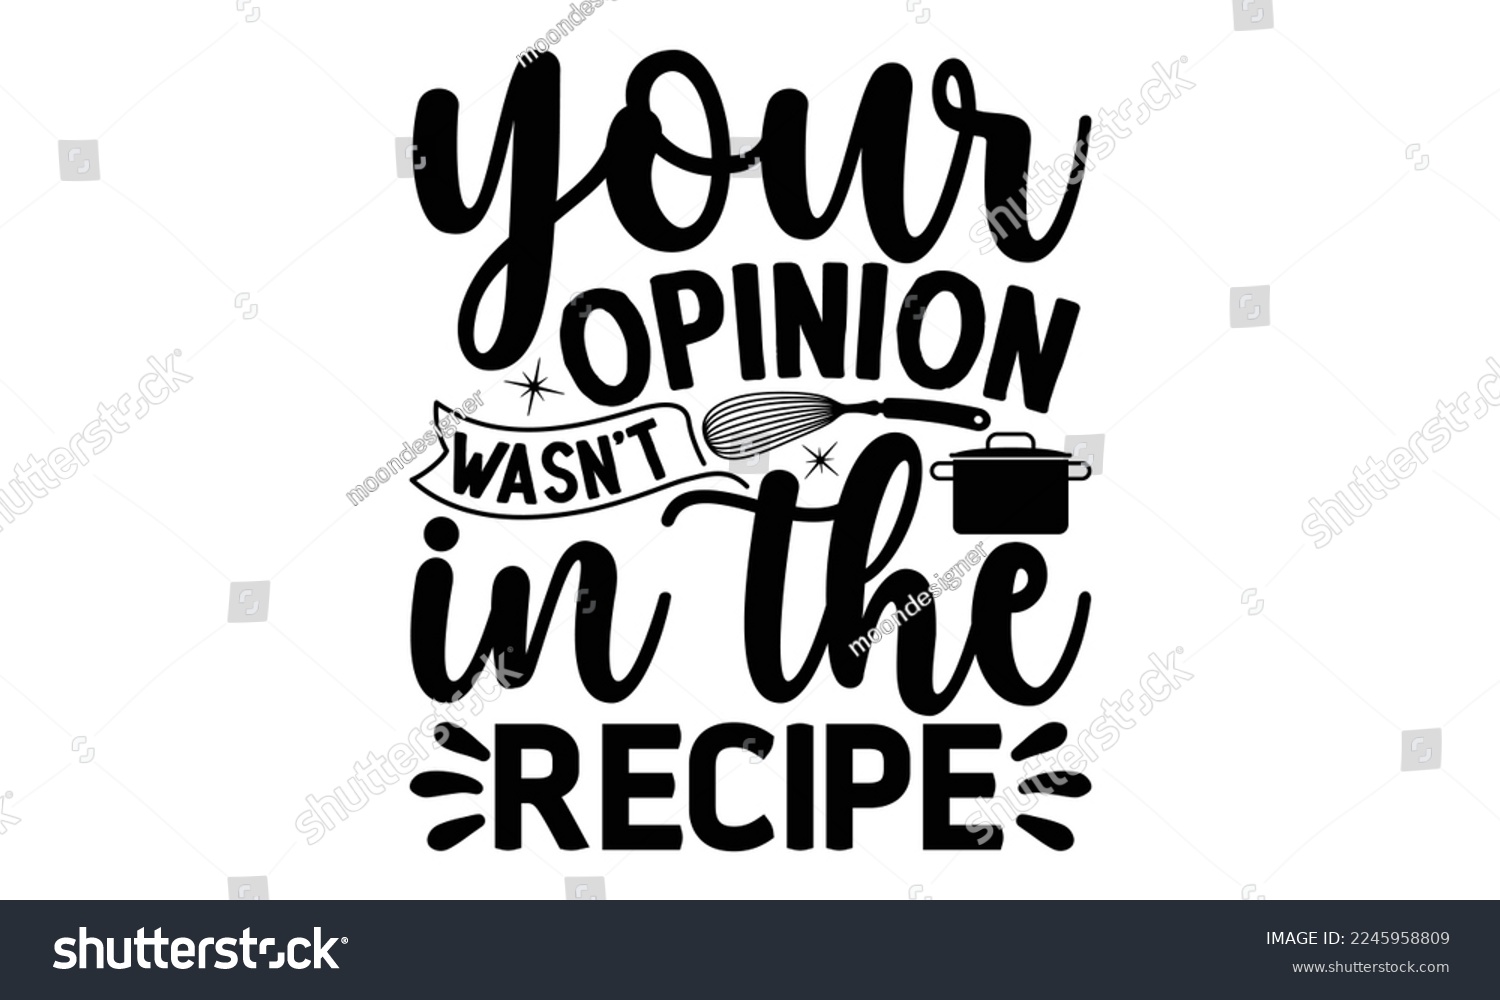 SVG of your opinion wasn’t in the recipe, cooking T shirt Design, Kitchen Sign, funny cooking Quotes, Hand drawn vintage illustration with hand-lettering and decoration elements, Cut Files for Cricut Svg and svg